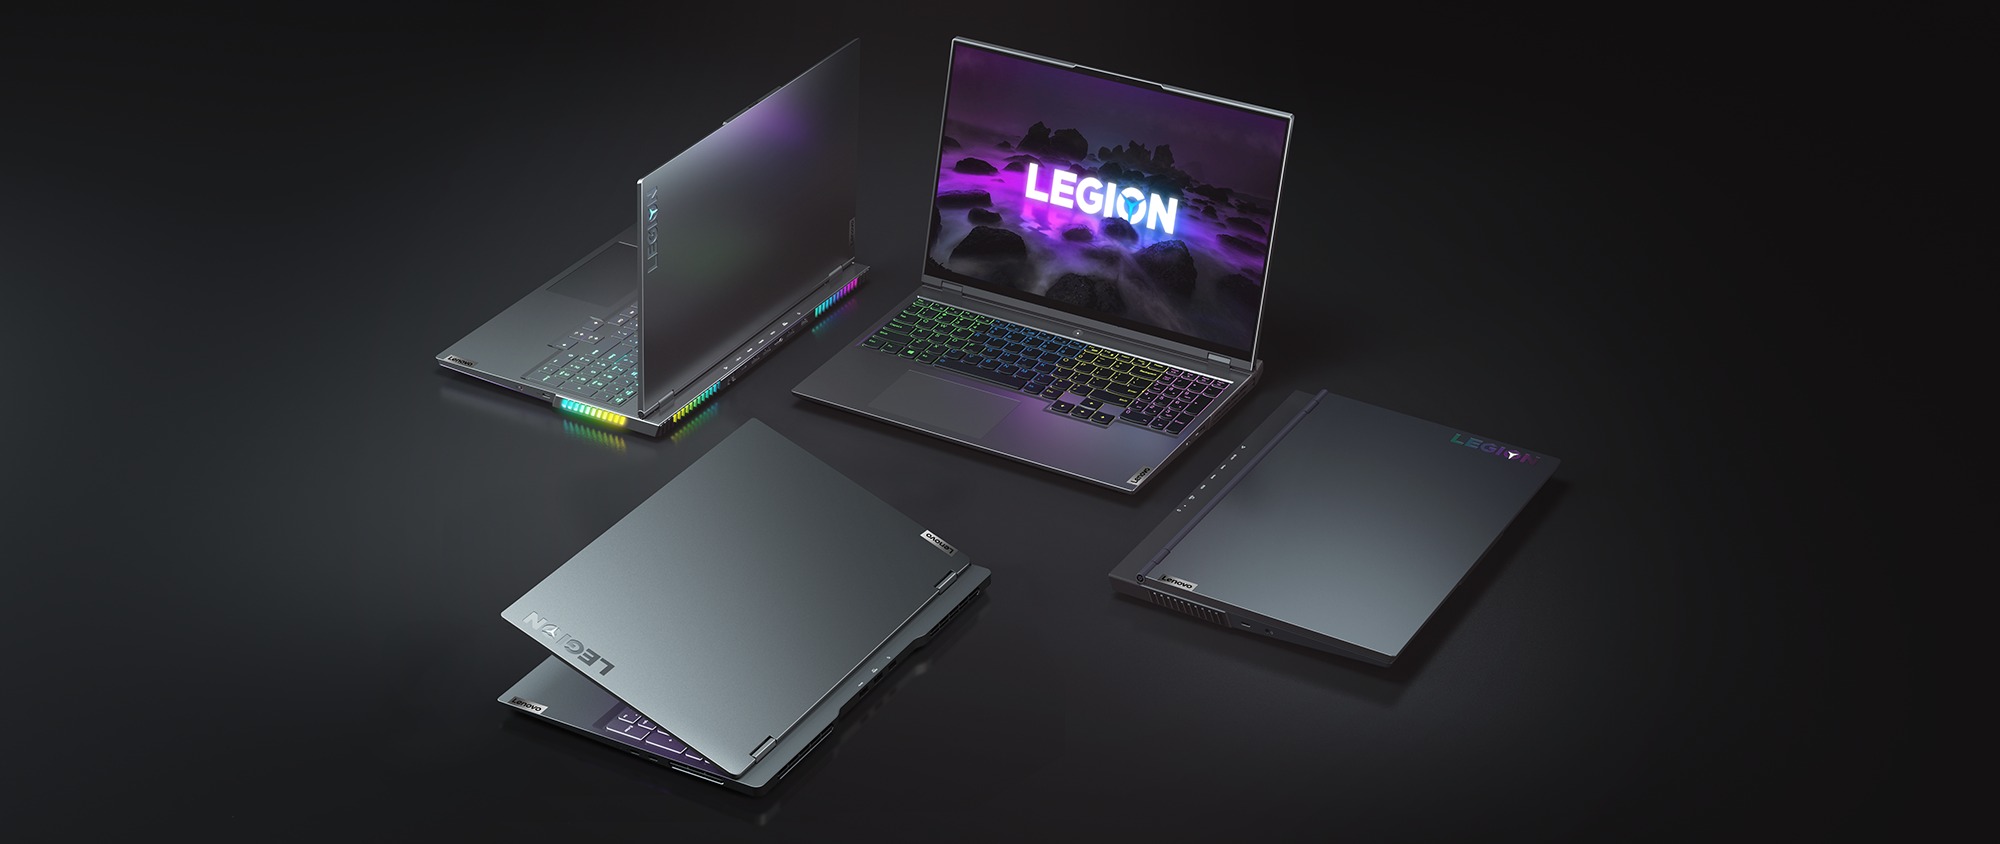 Lenovo announces Legion gaming laptops with AMD Ryzen 5000H and 